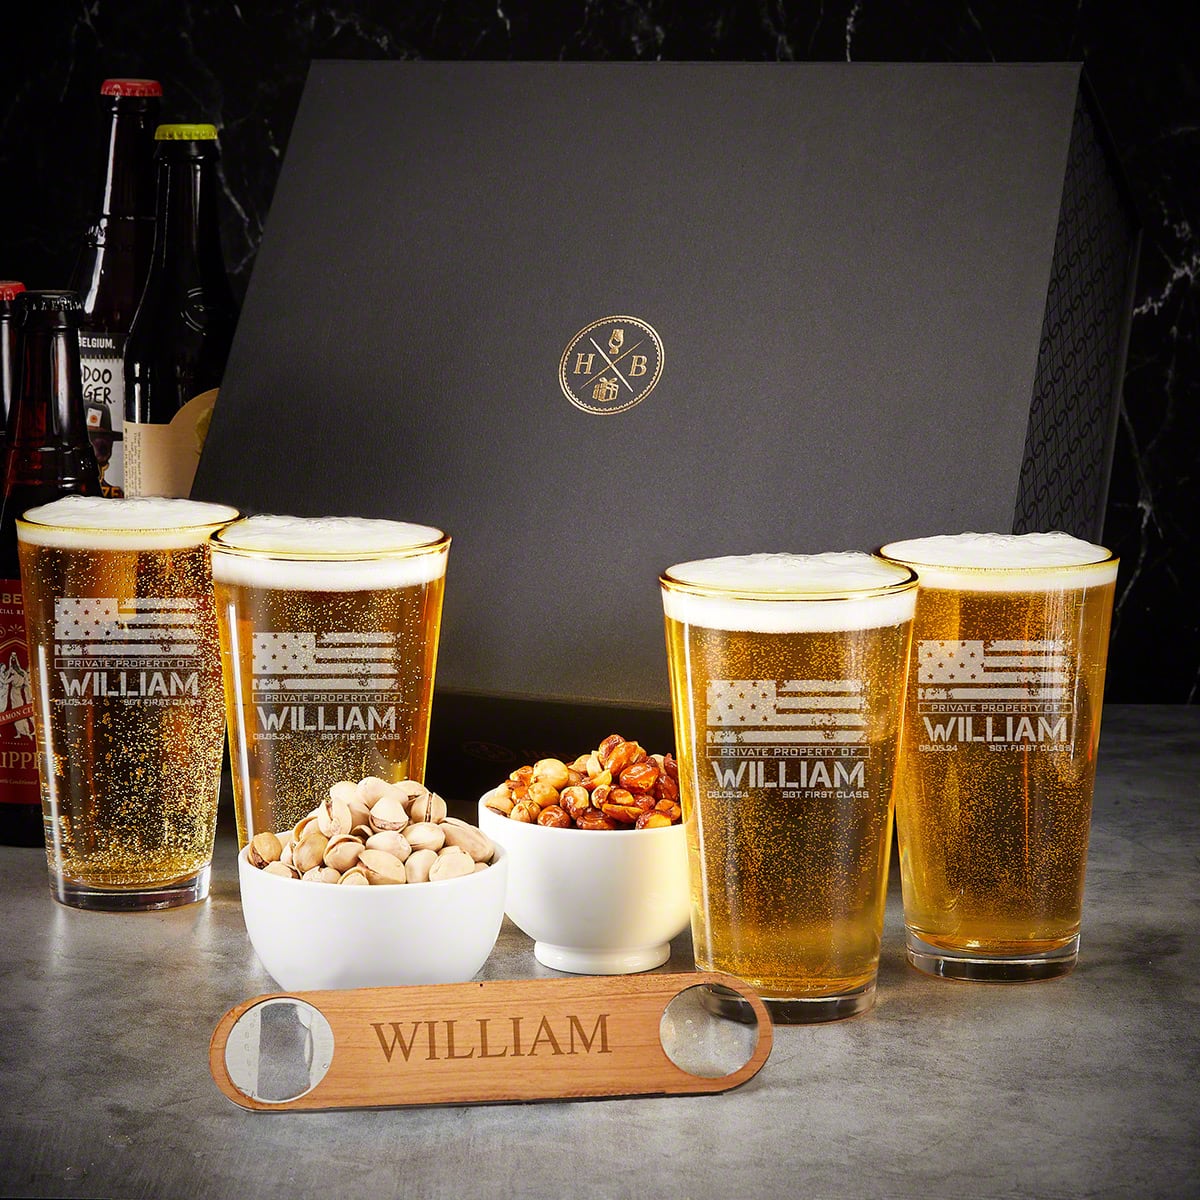 Engraved Military Gift Gold Rim Pint Glass Set with Luxury Box & Snacks - 9pc American Heroes